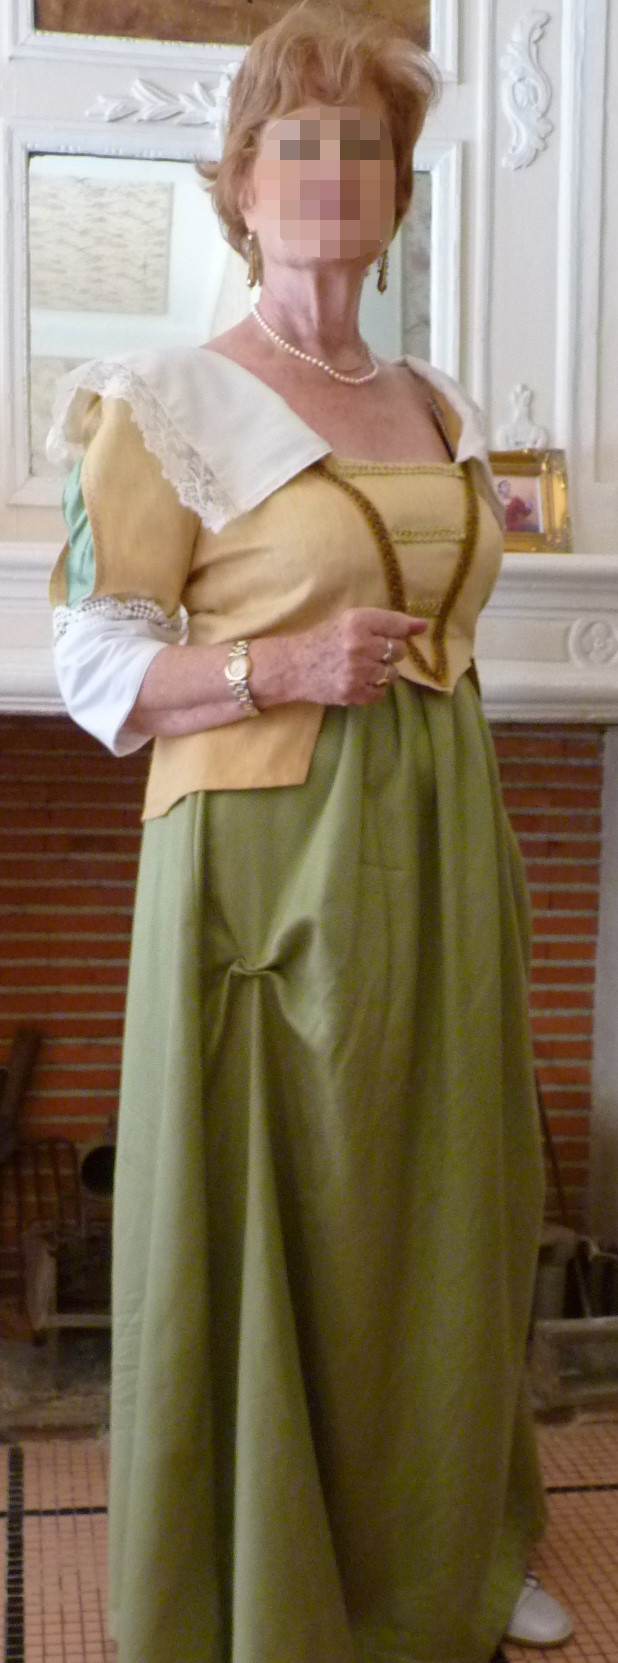 Lady of Armanville’s costume